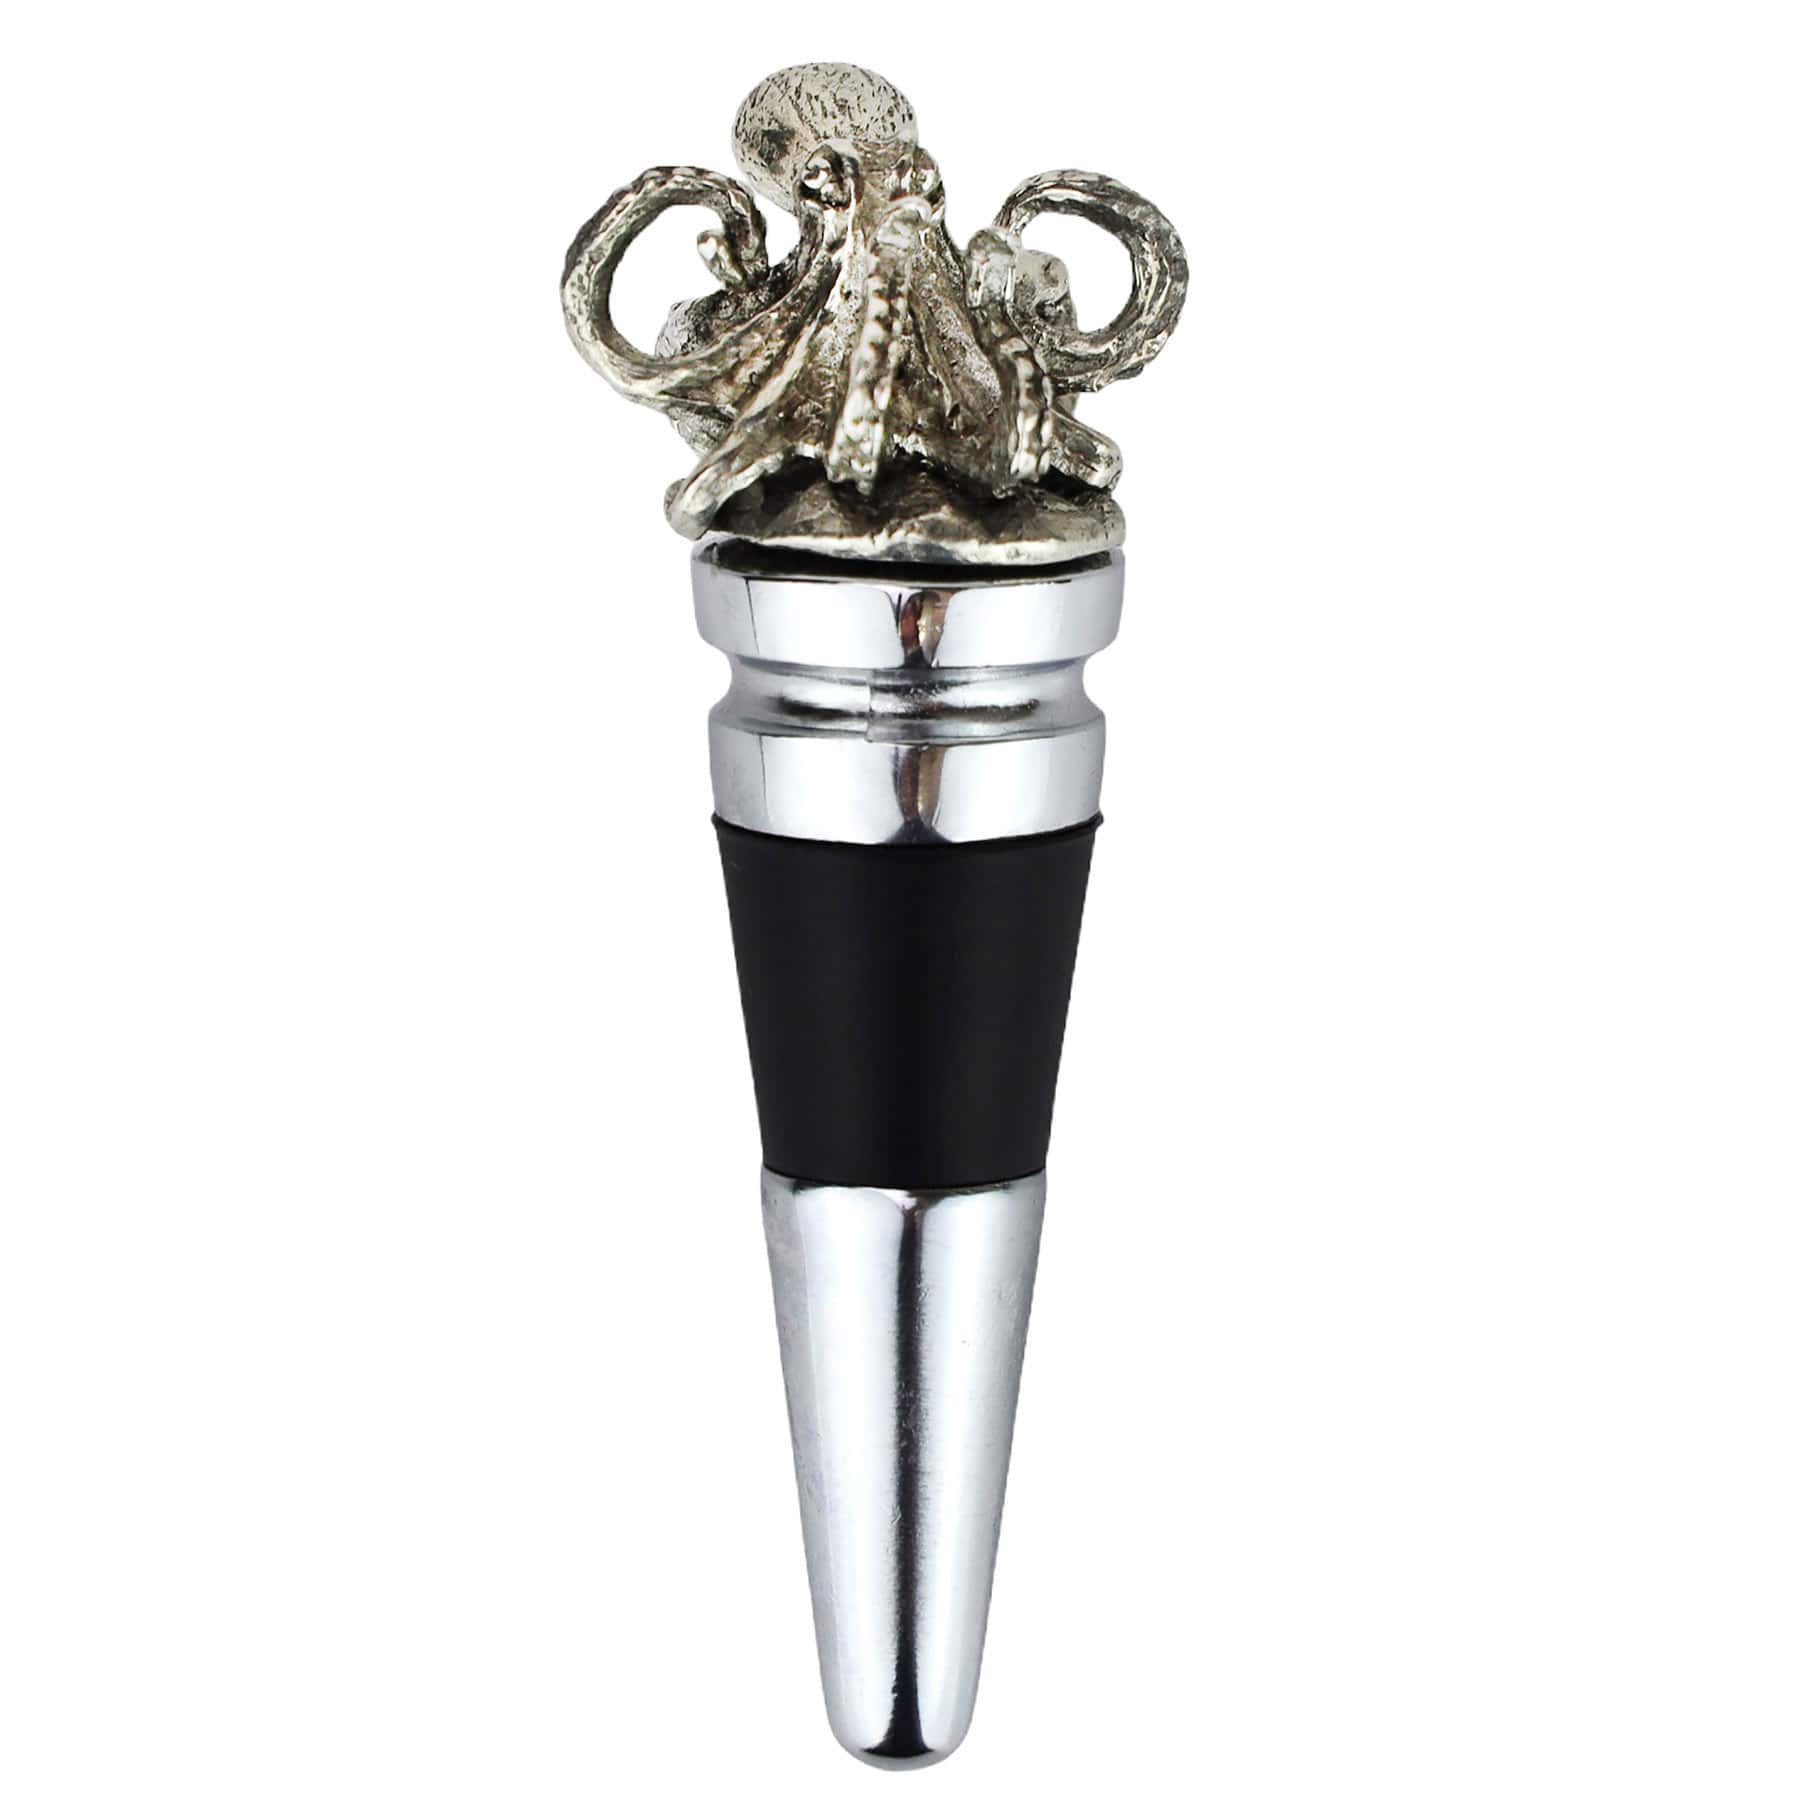 Pewter Octopus shaped Bottle Stopper with body spread,showing the metal base